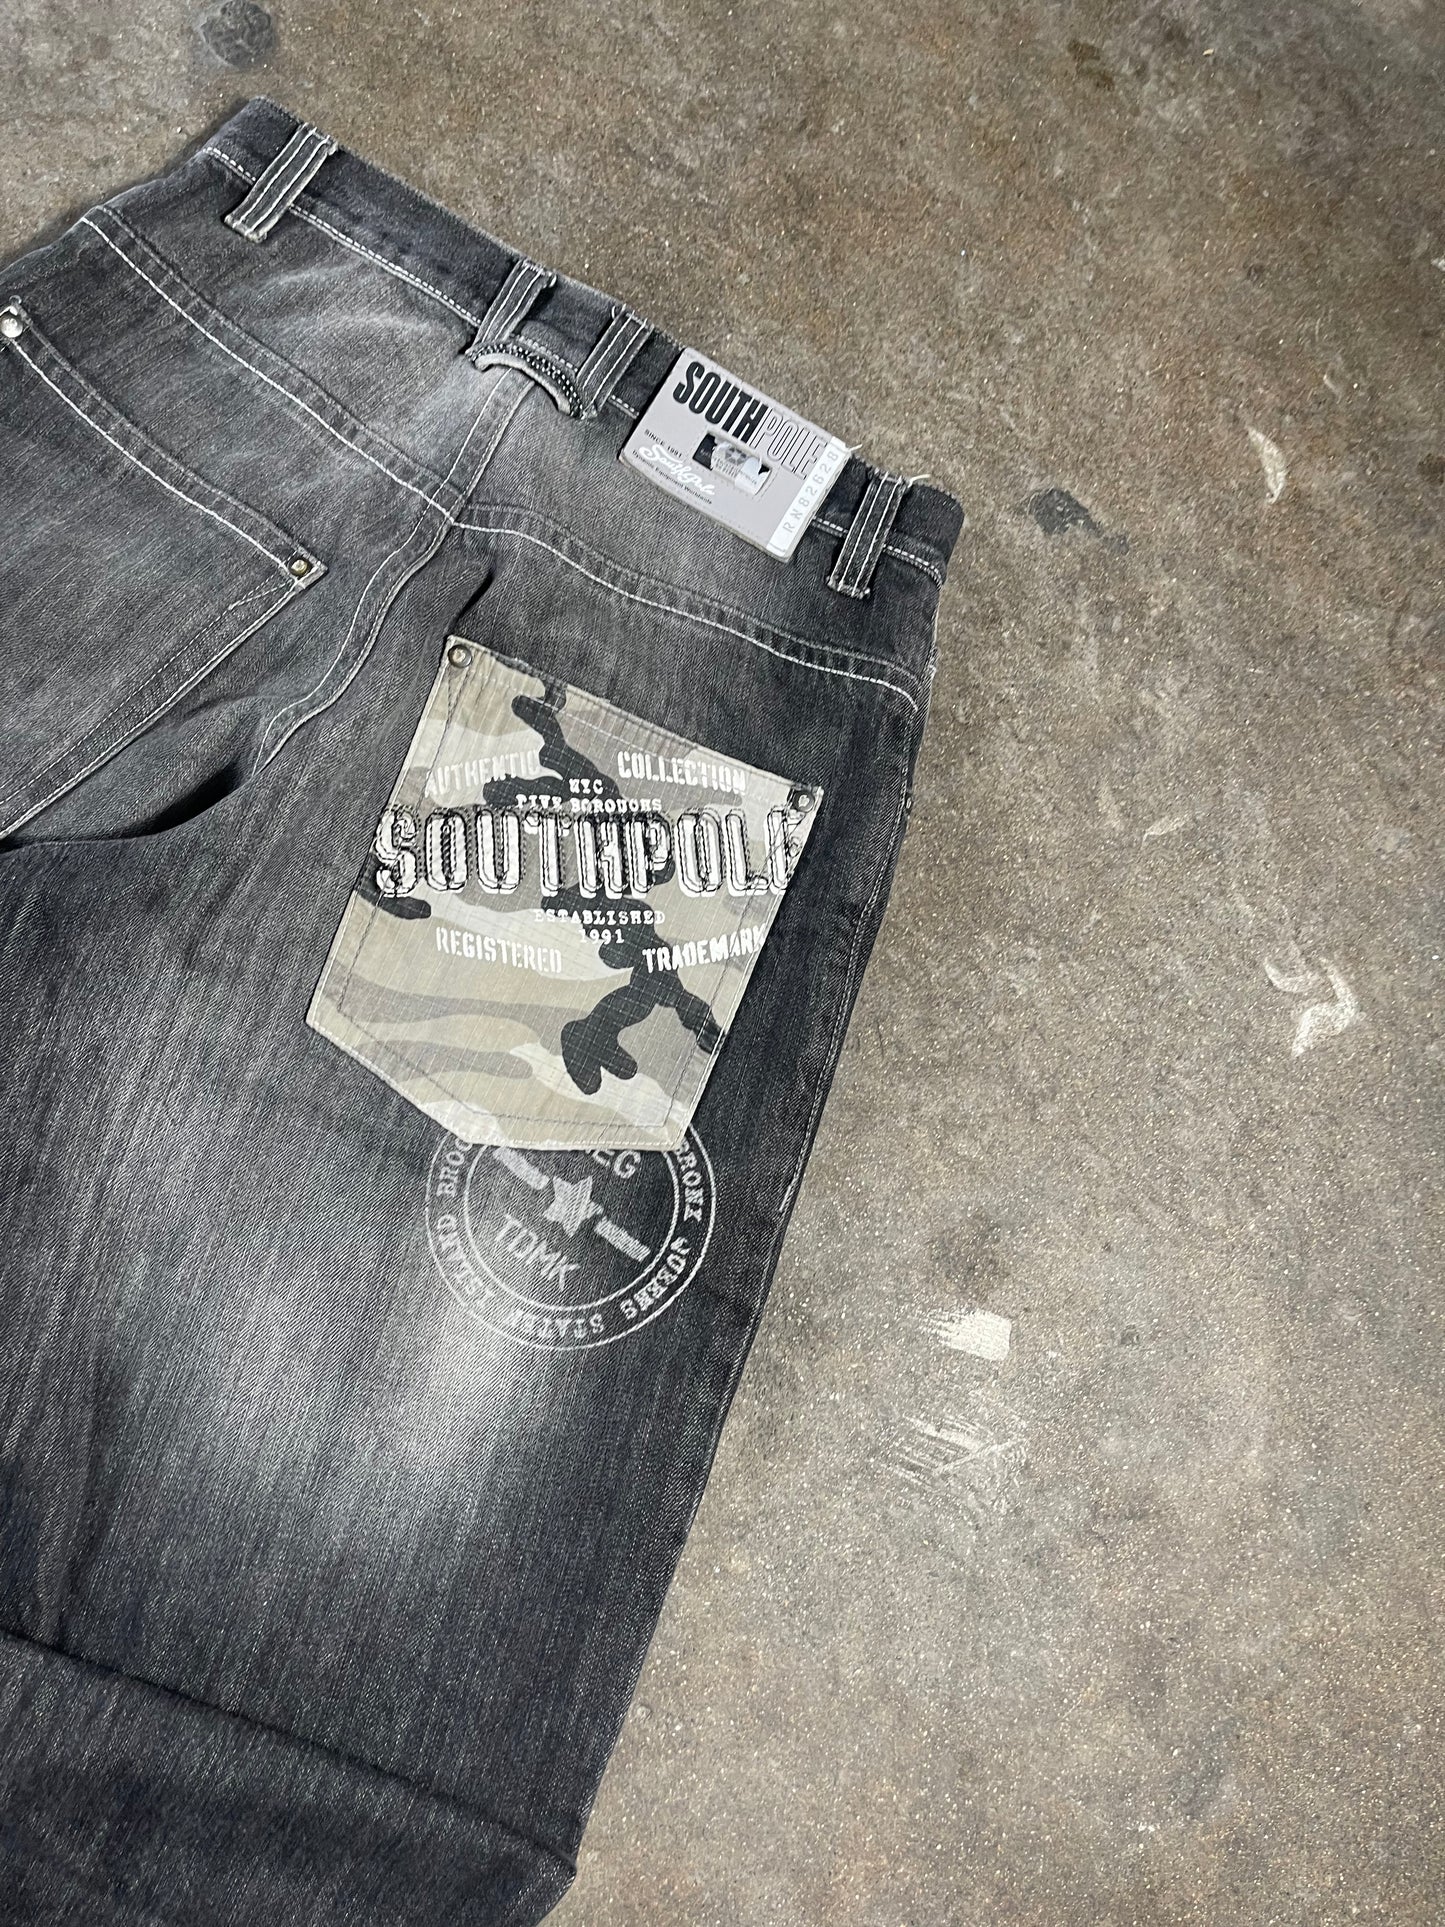 Baggy Black Washed Southpole Jeans 30x30